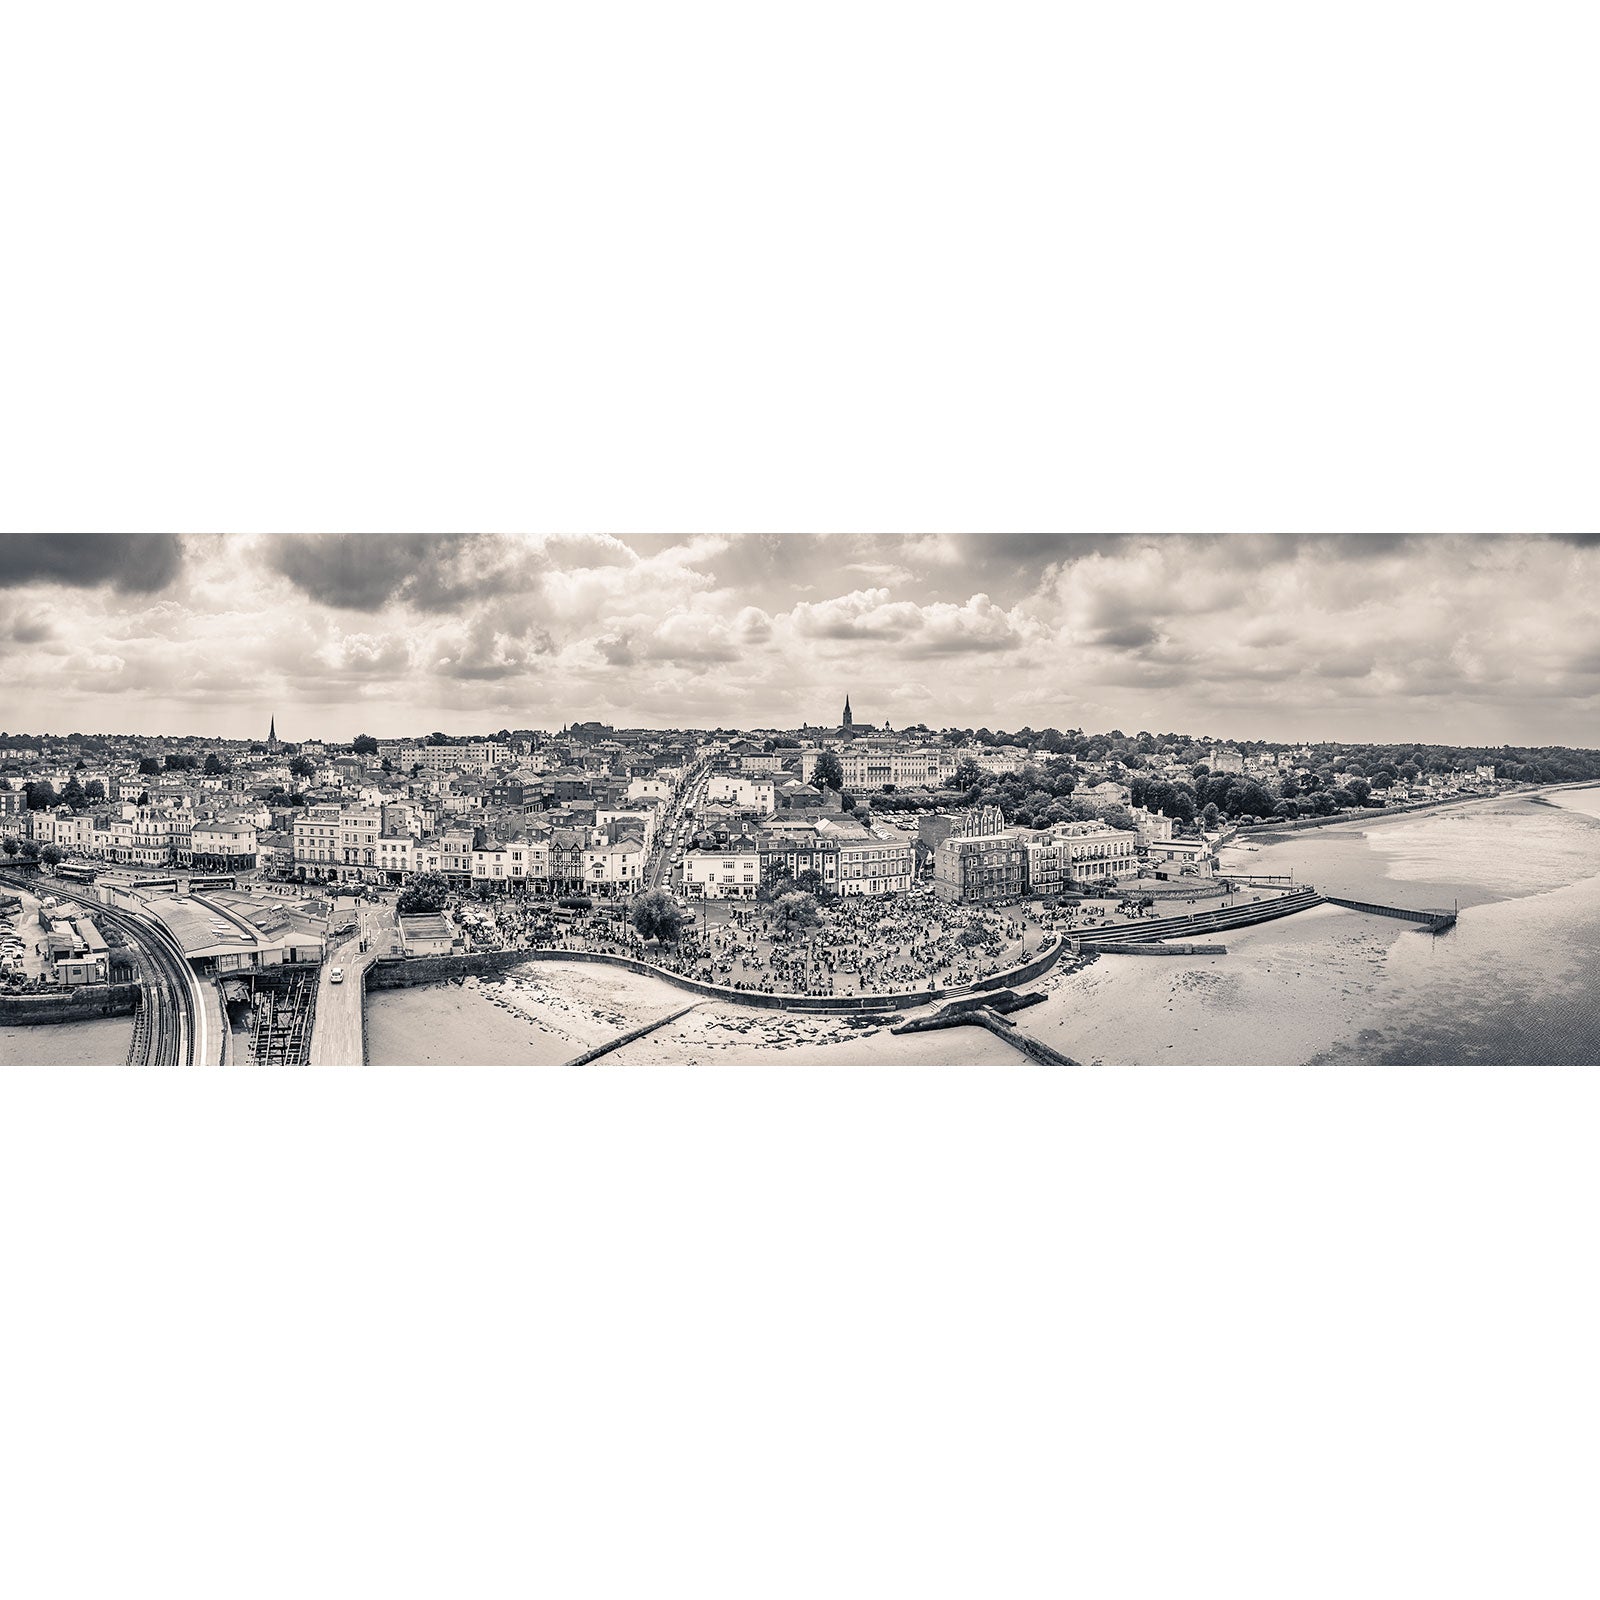 Panoramic view of a European cityscape by the river on an overcast day, capturing the essence of the Isle captured by Available Light Photography's Scooter Rally, Ryde.